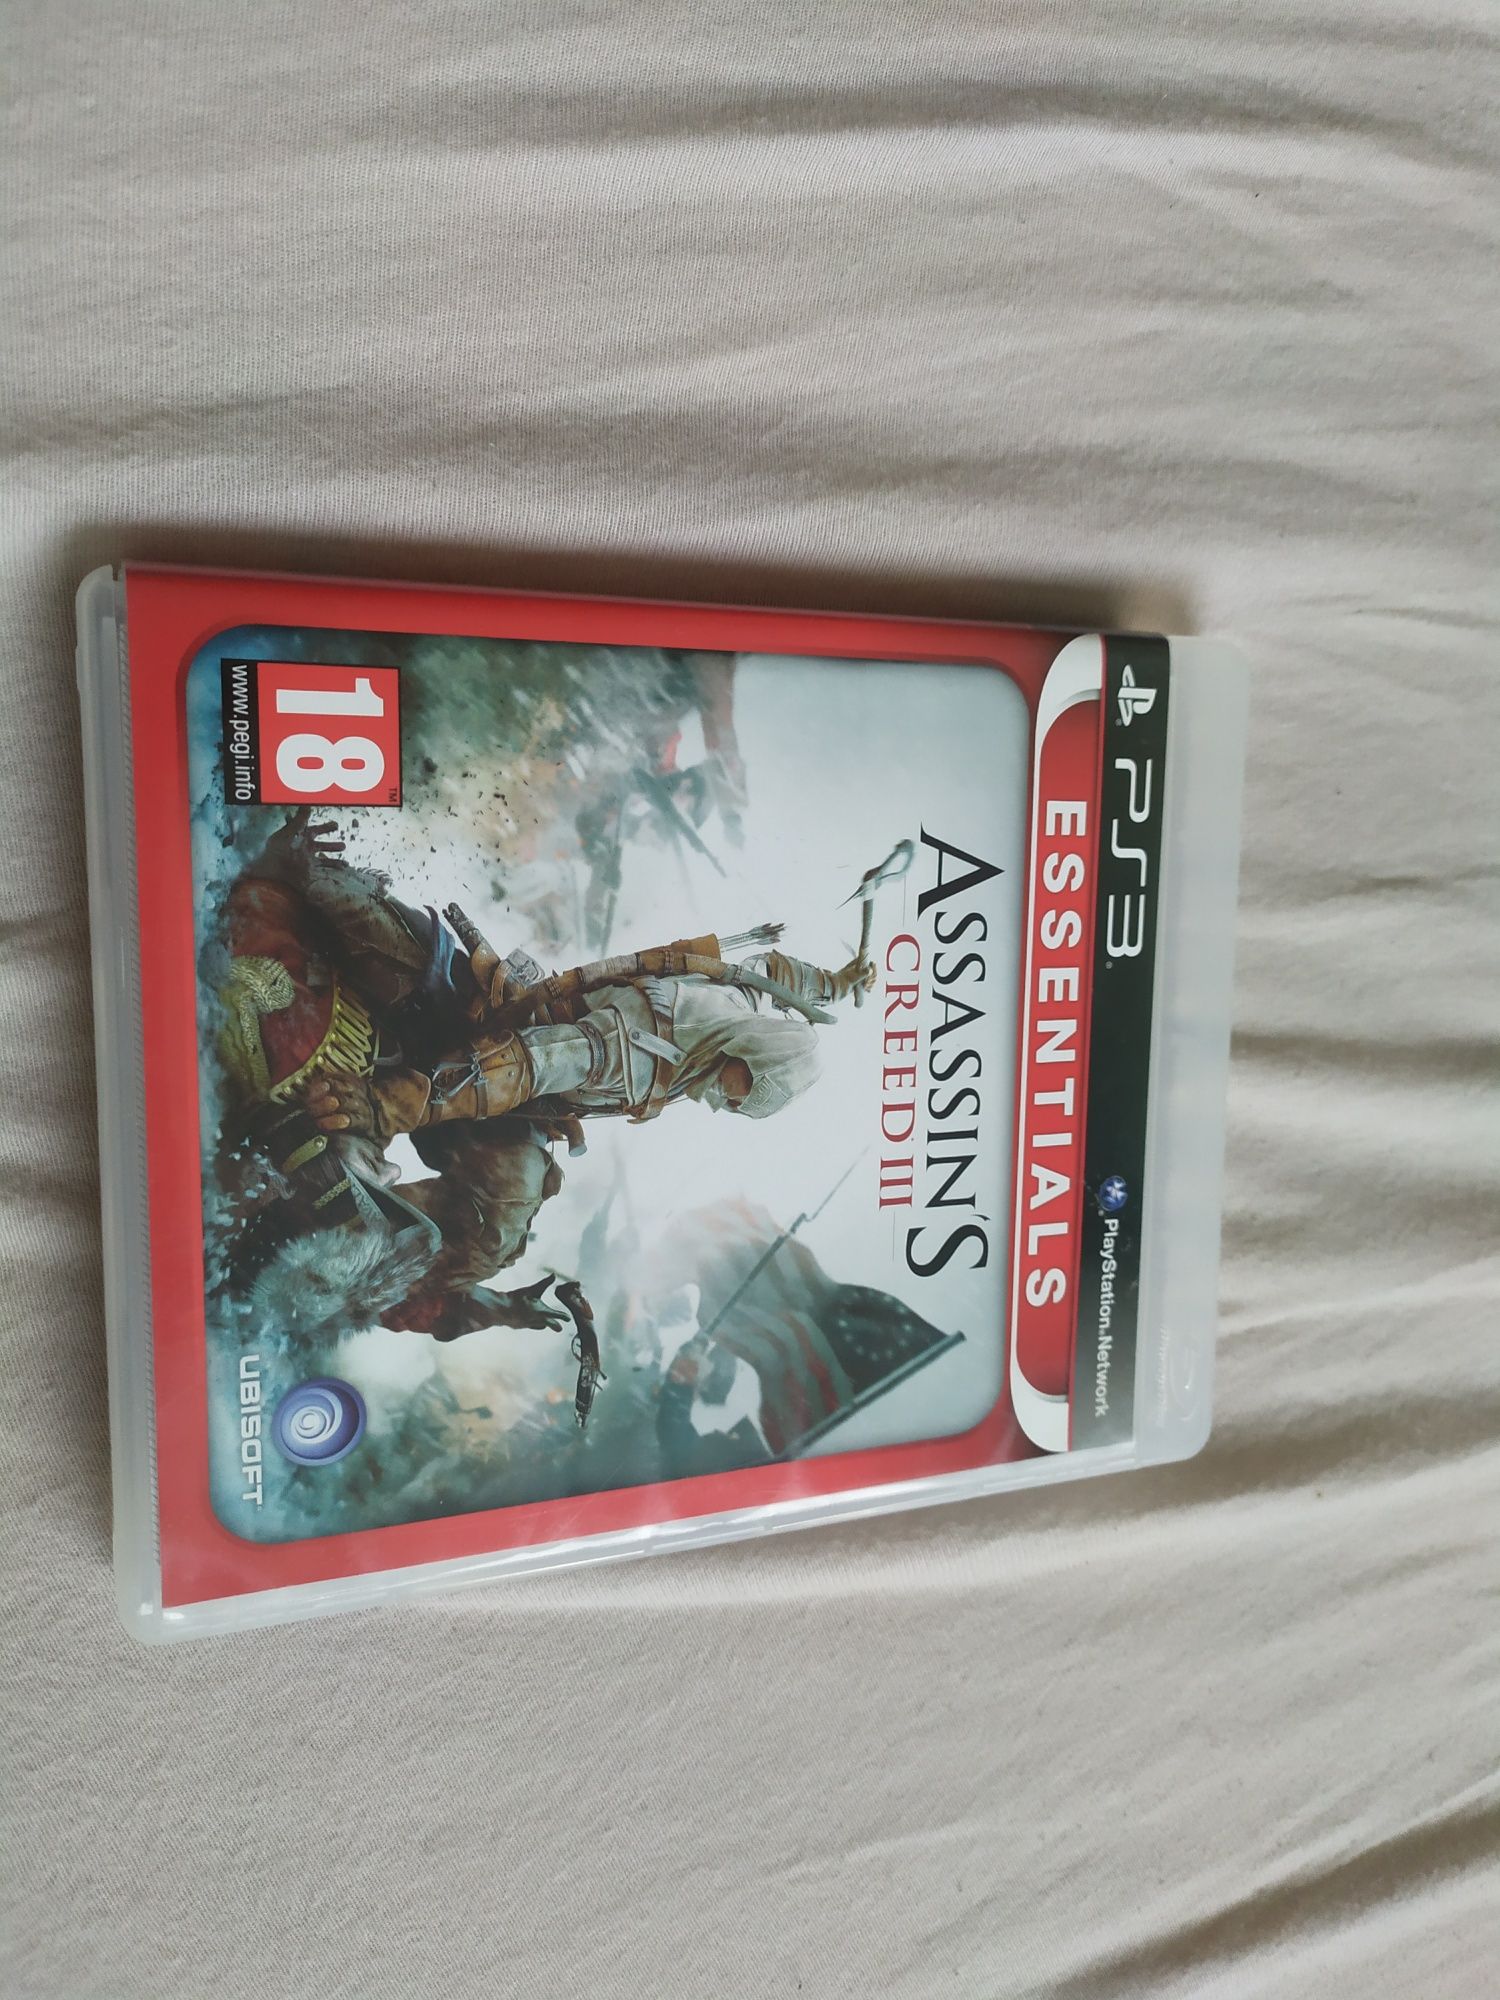 Gry ps3 honor assassin's Creed